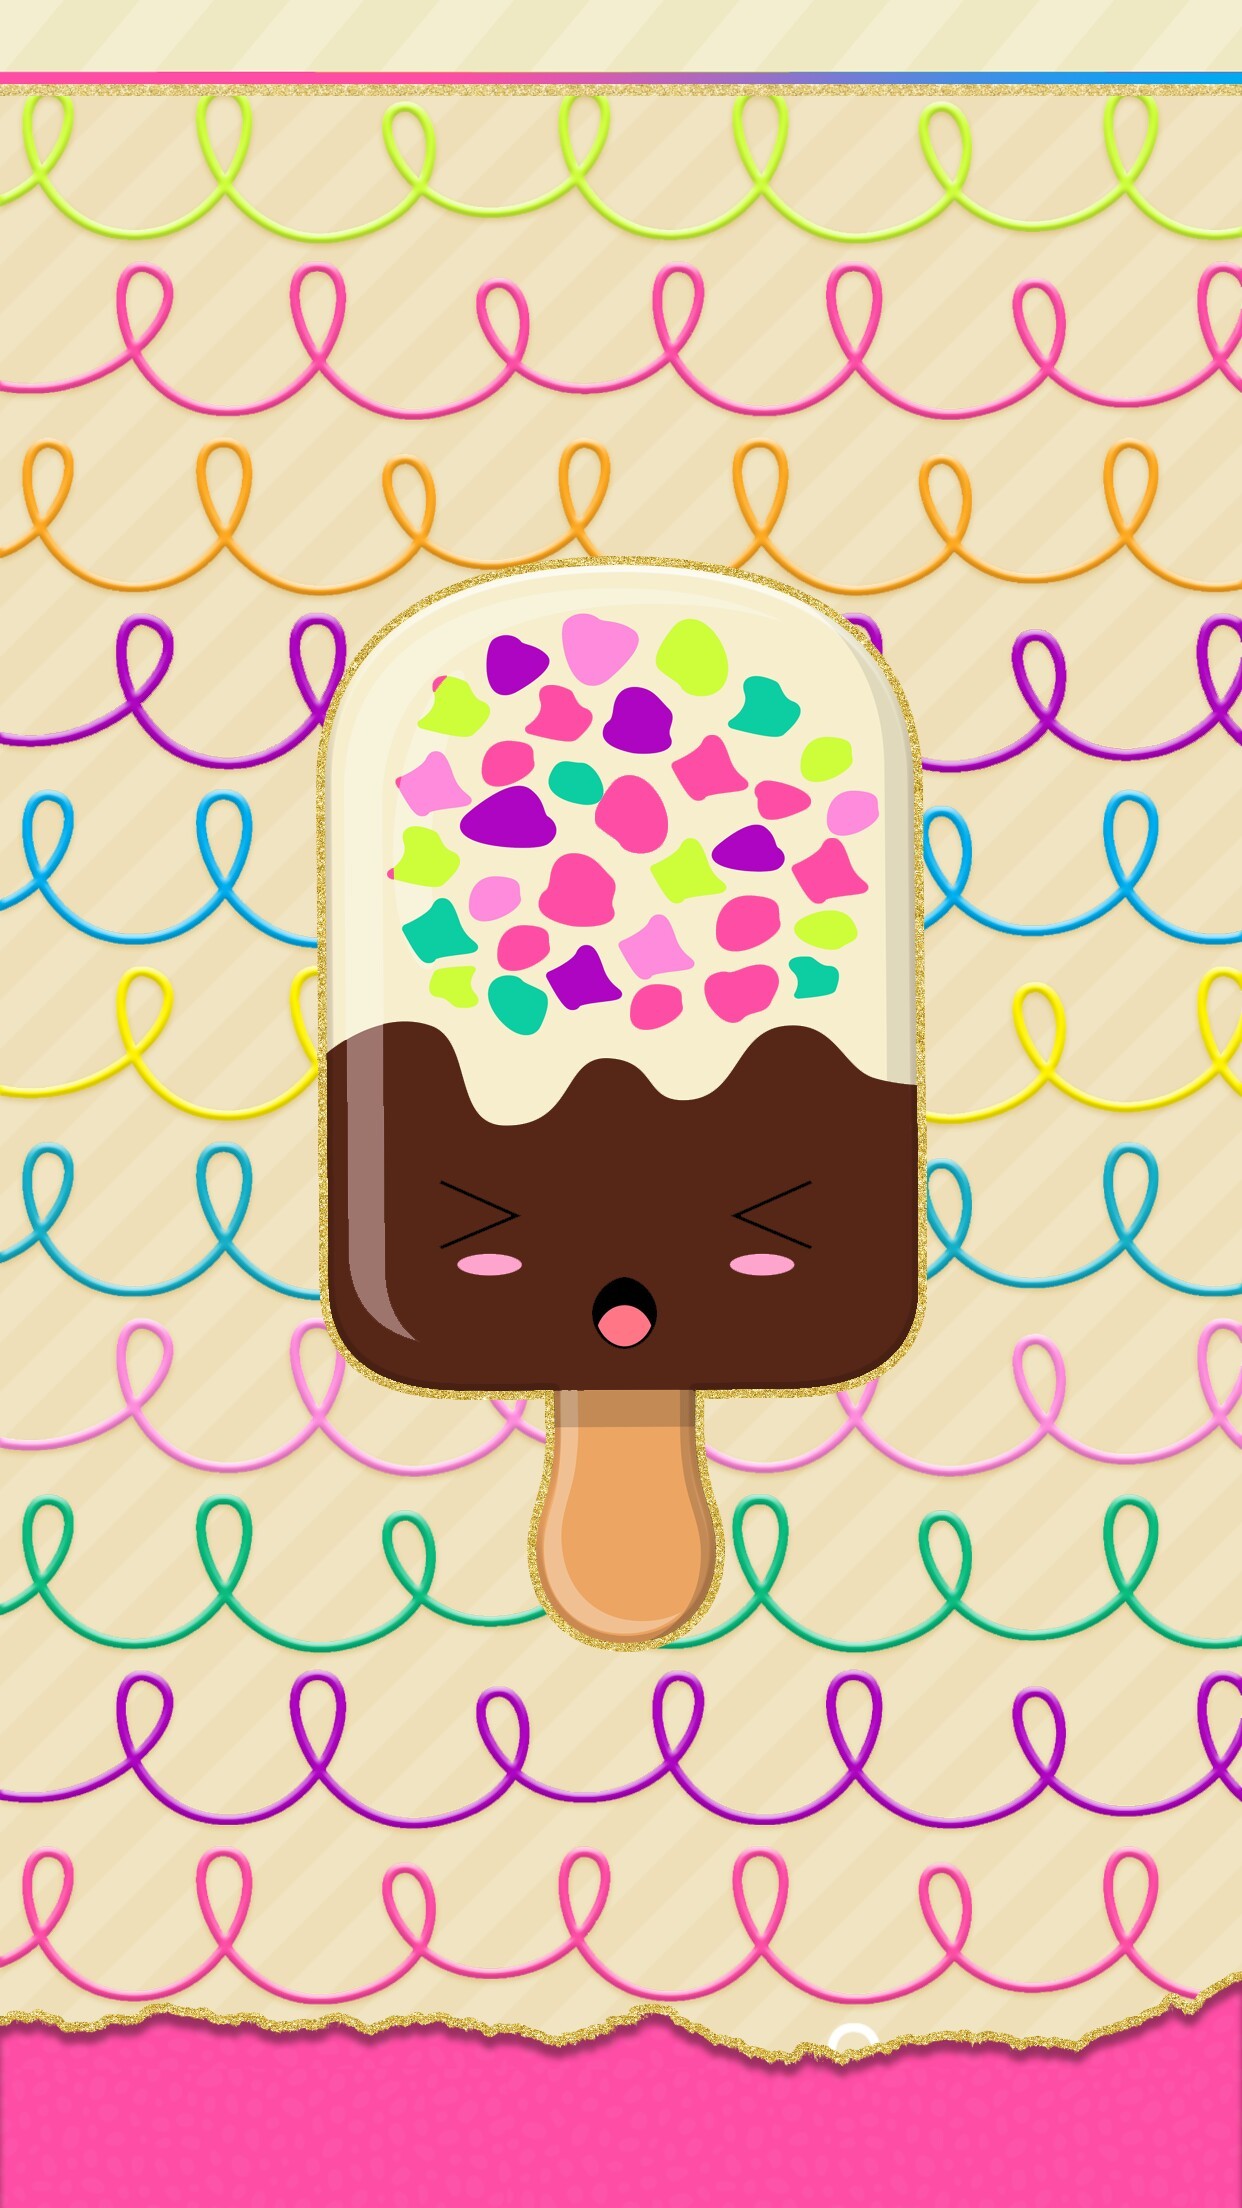 Cute Wallpapers, Iphone Wallpapers, Rainbow Wallpaper, Iphone 3, Candy Land, Icecream, Popsicles, Kawaii, Smartphone